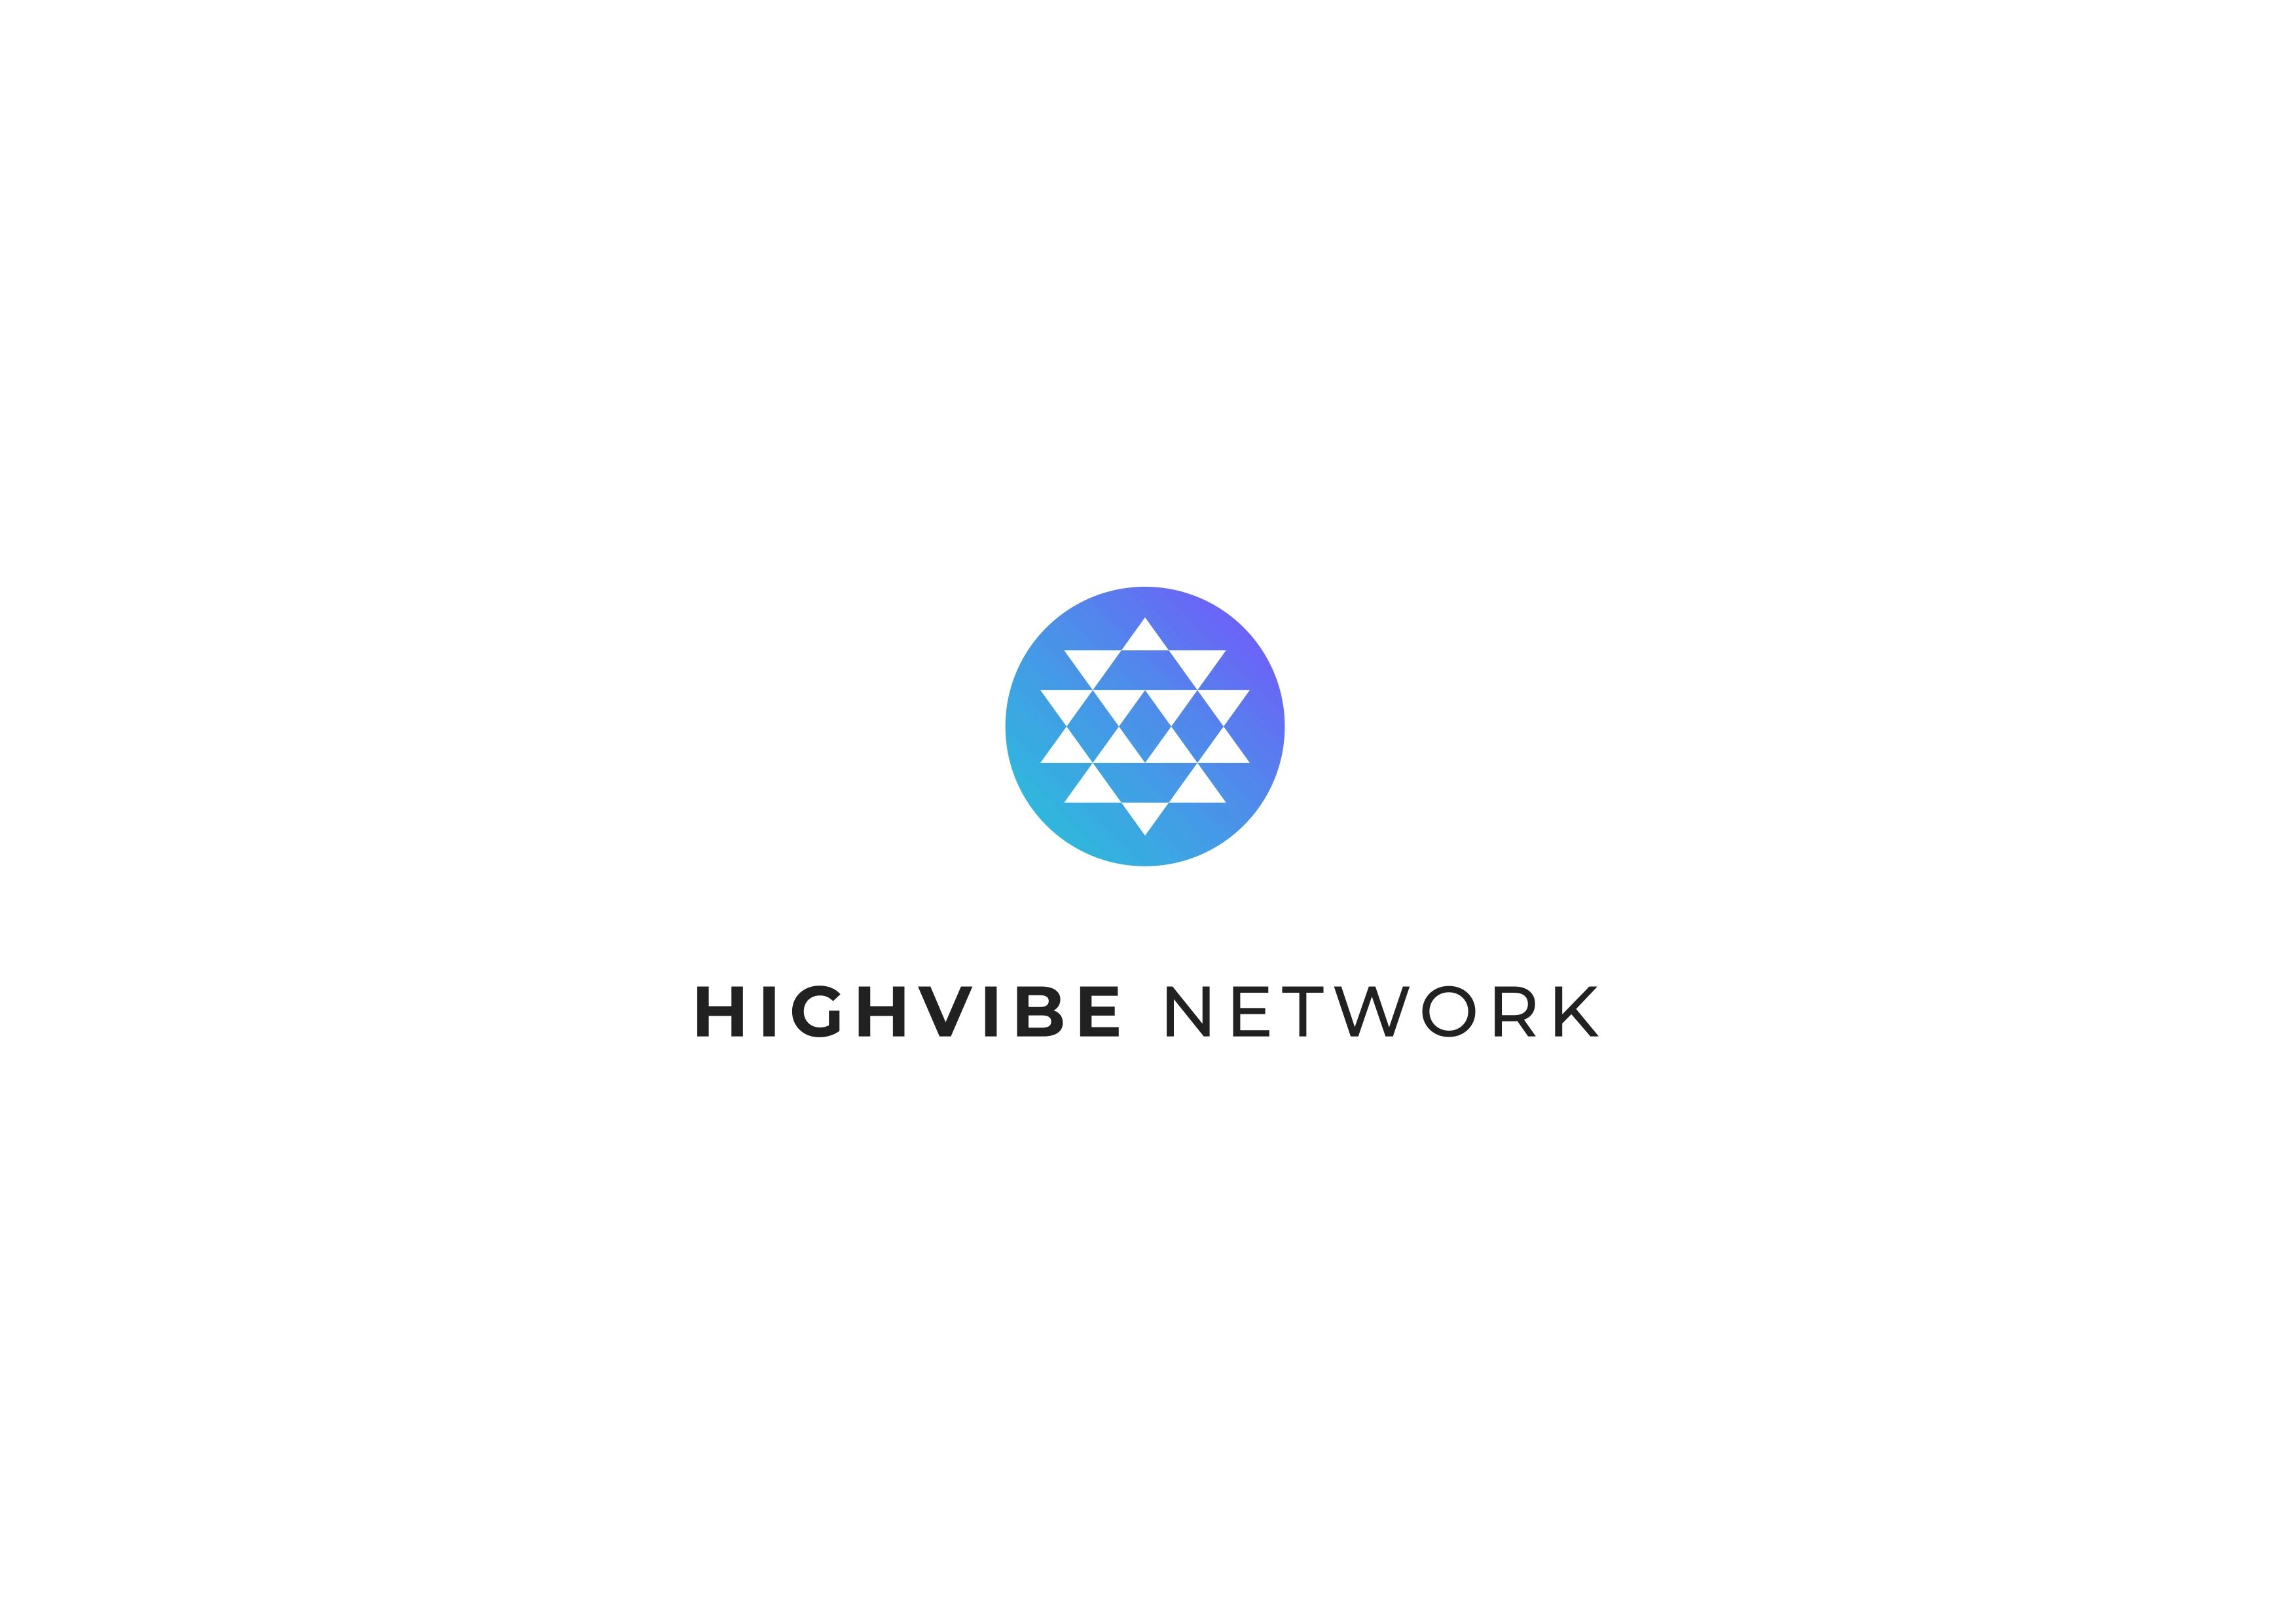 Highvibe Network is here to raise consciousness by providing elevating experiences and interactive digital storyworlds in the metaverse, and IRL.